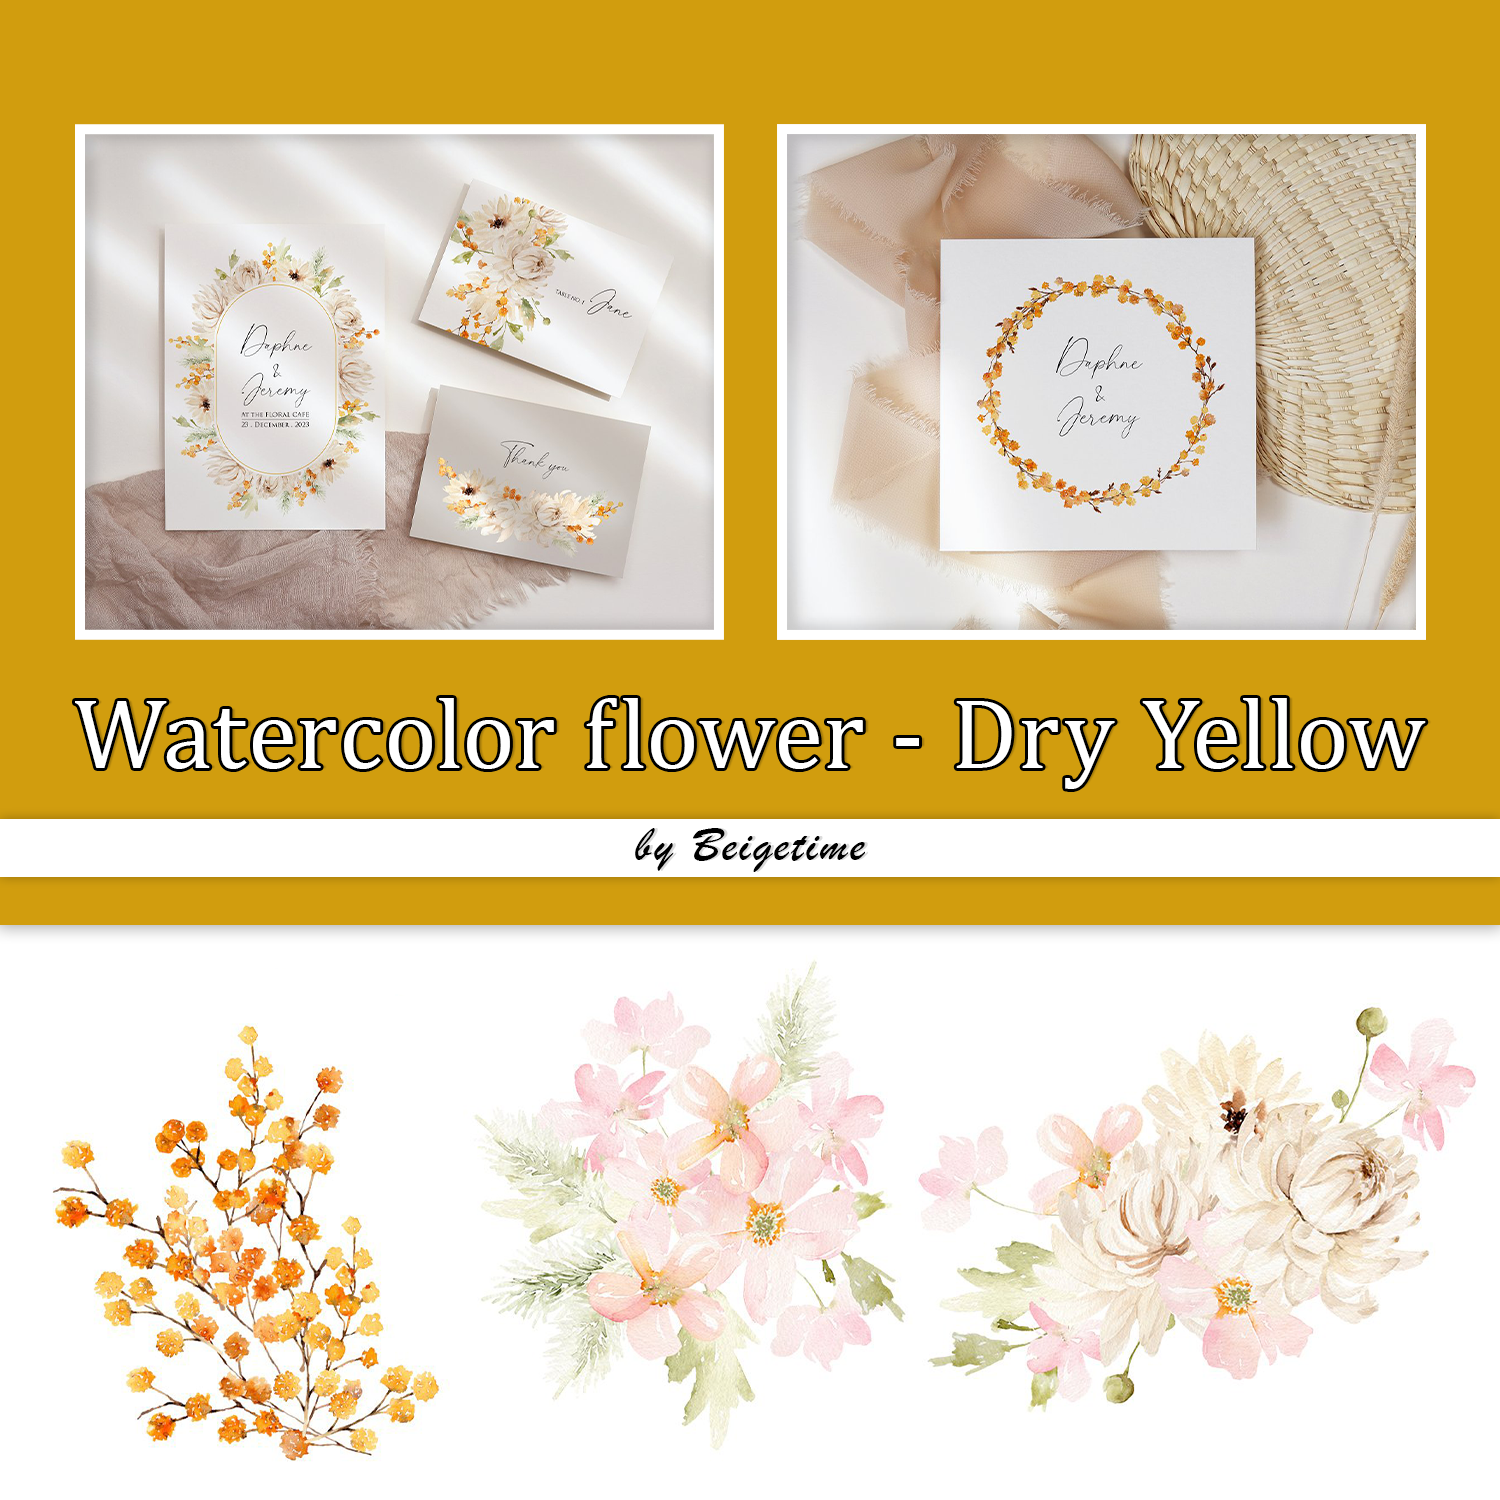 Prints of watercolor flower dry yellow.